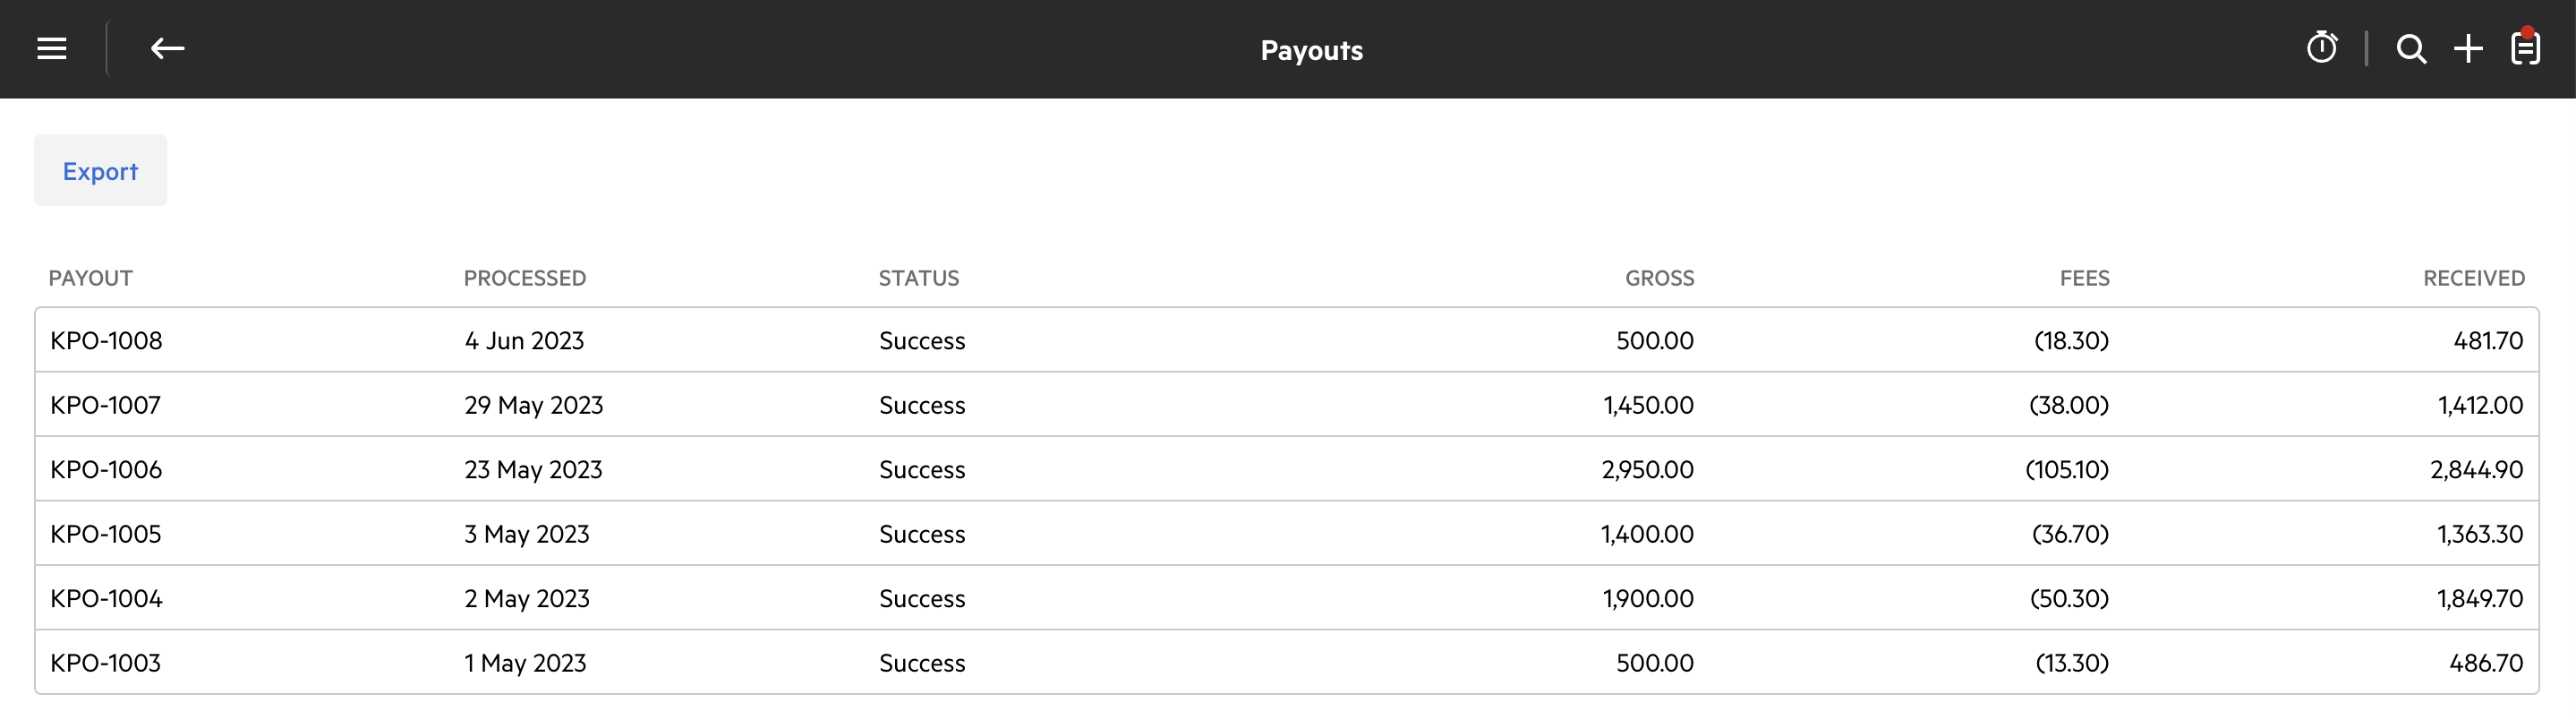 Payouts report